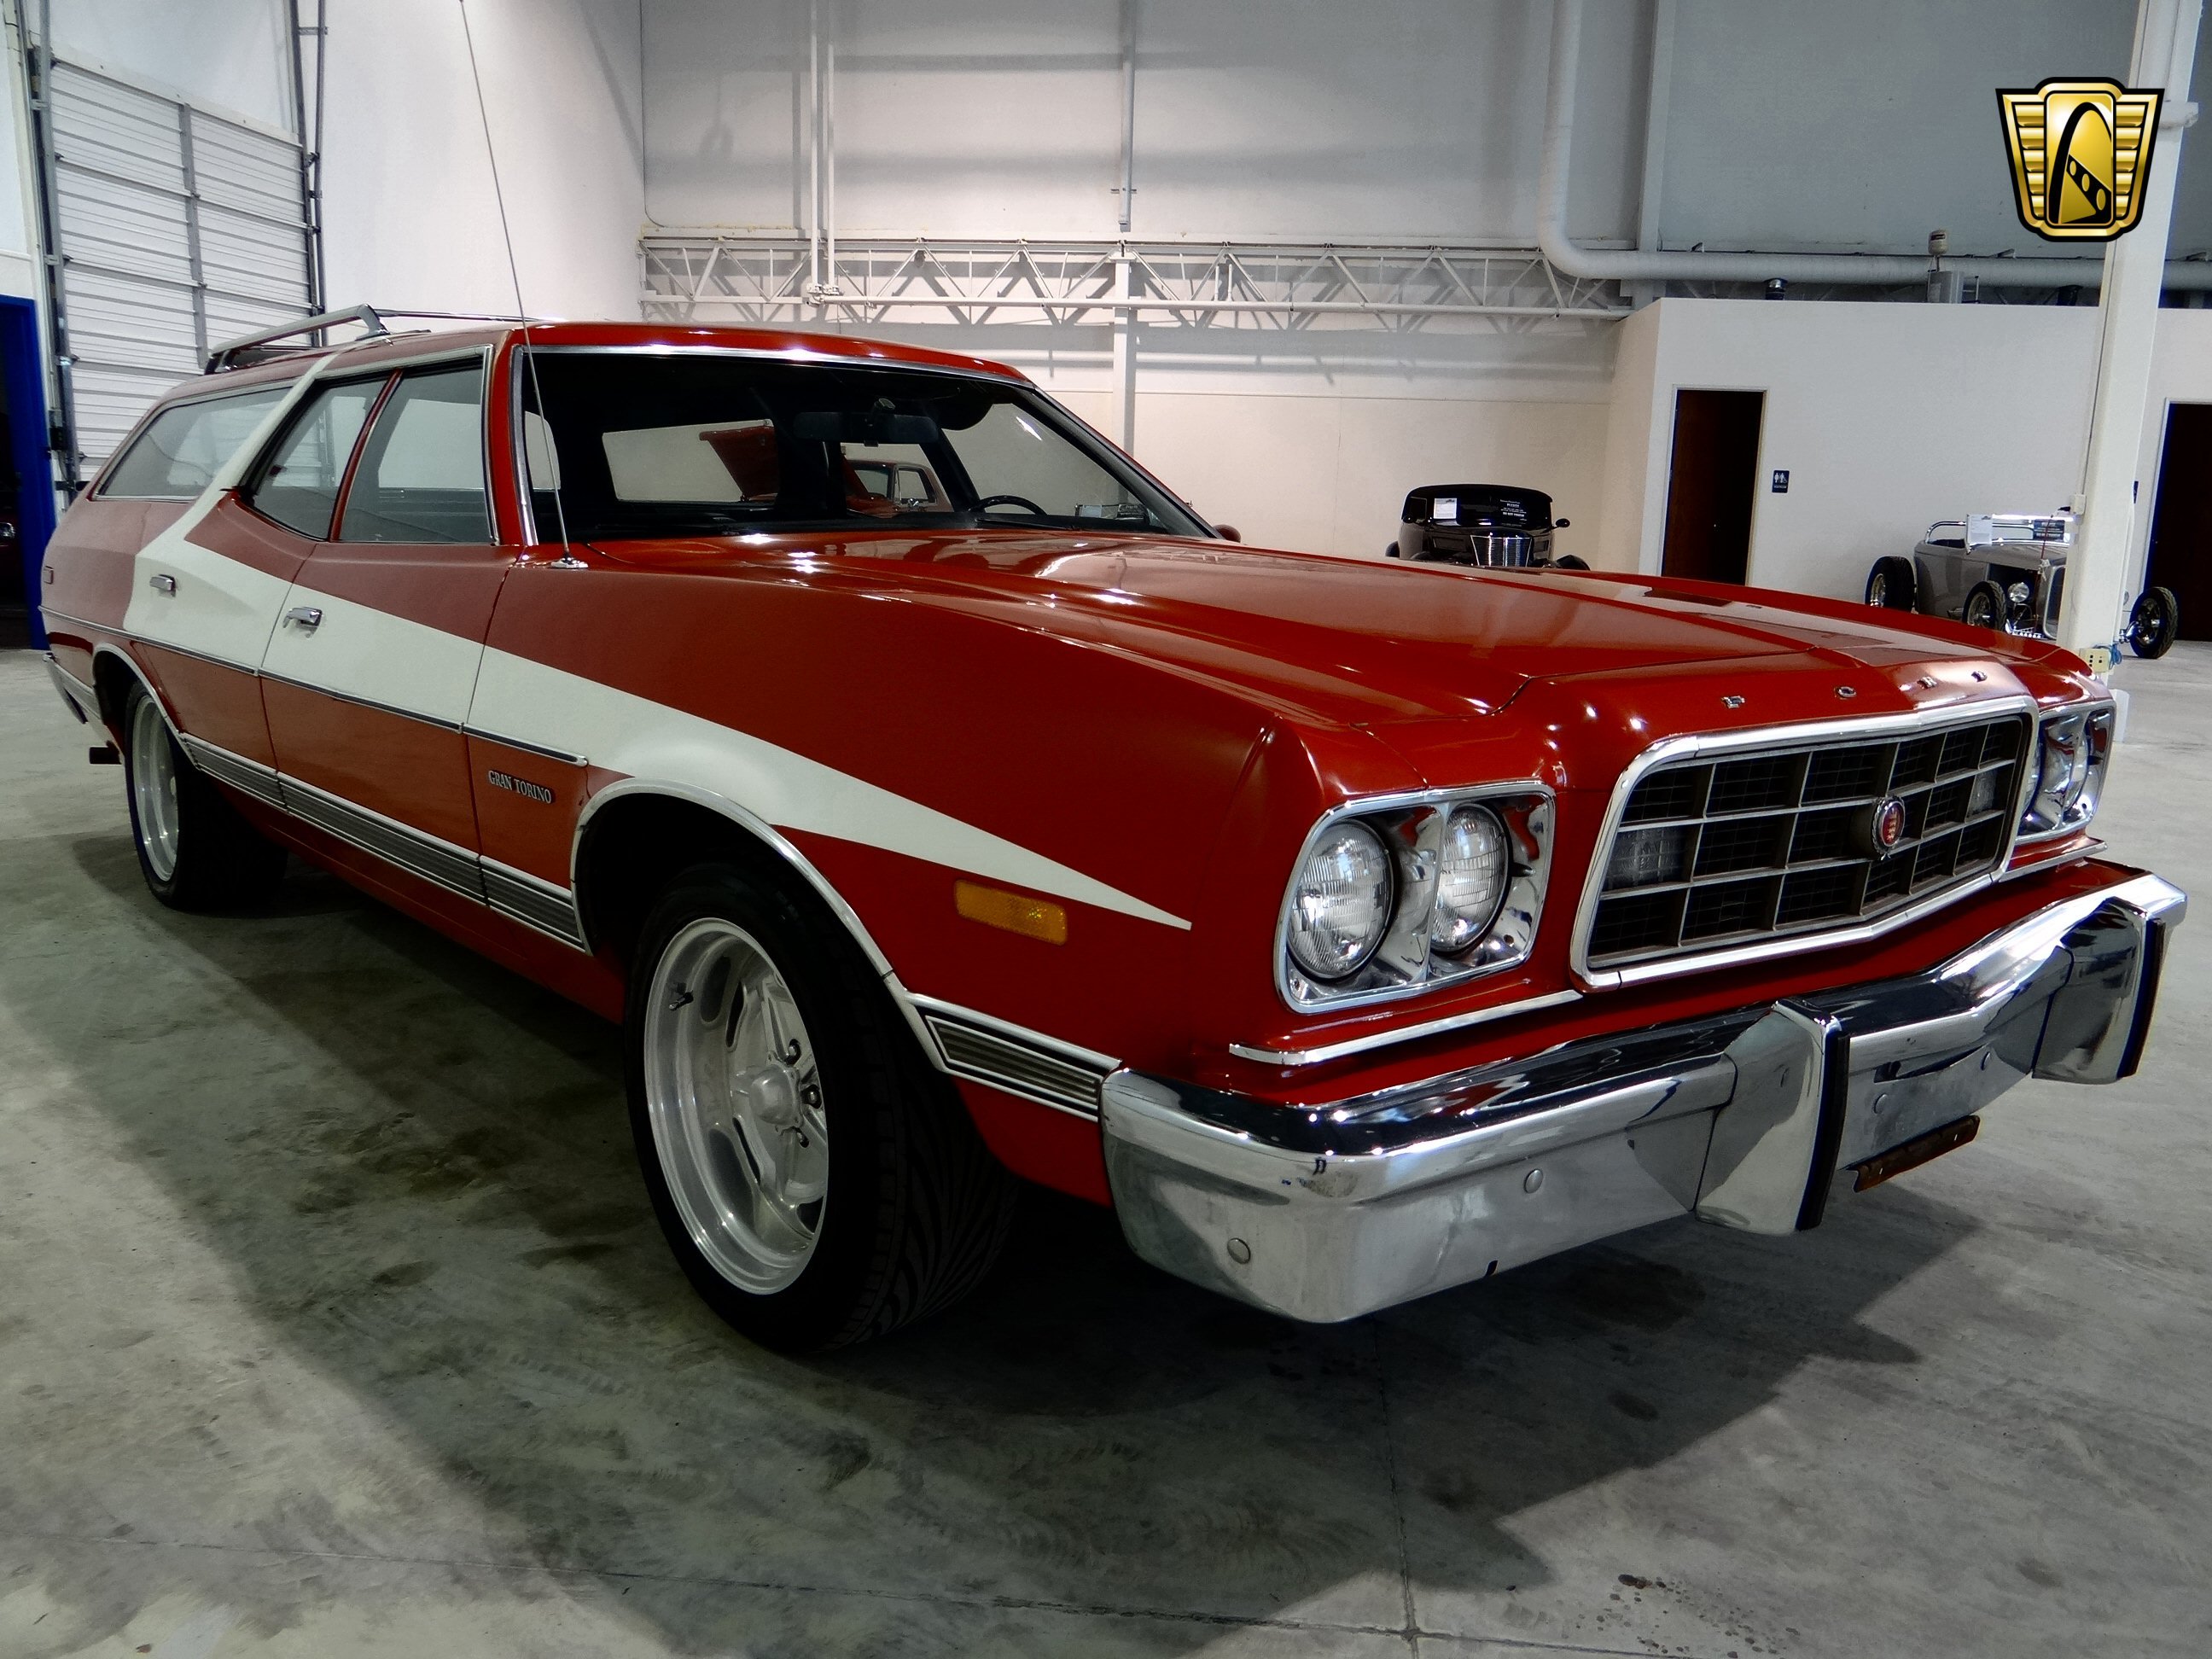 1973, Ford, Gran, Torino, Stationwagon, Muscle, Classic, Hot, Rod, Rods,  15 Wallpaper